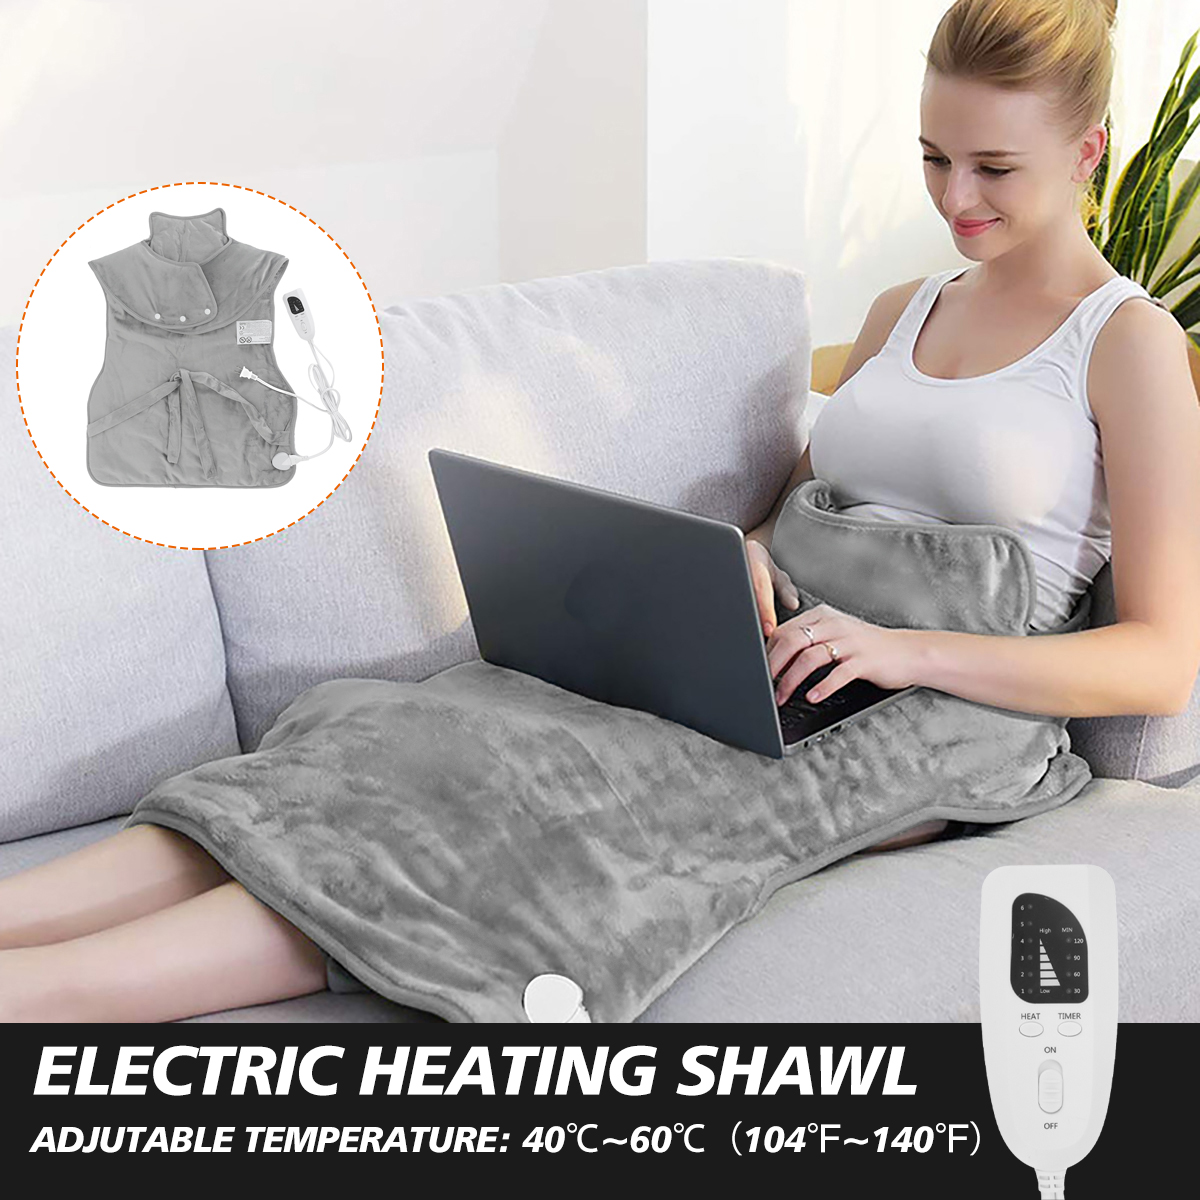 Dehumidification-Smart-Electric-Heating-Shawl-6-level-Temperature-Adjustment-Electric-Heating-Blanke-1936106-3